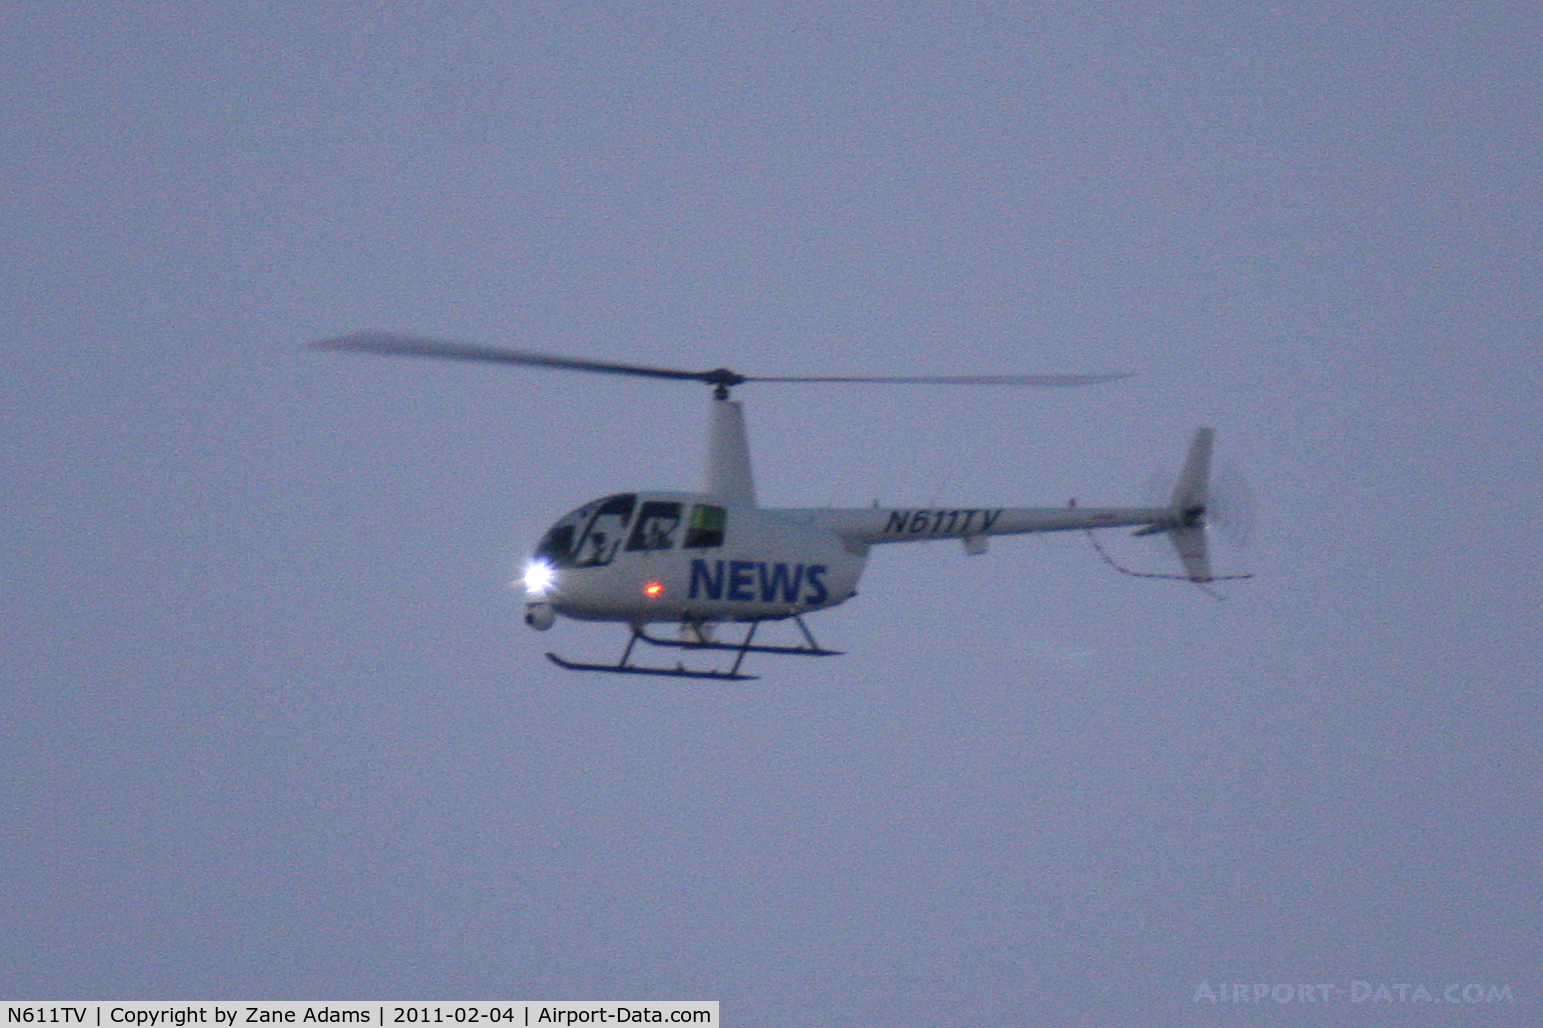 N611TV, Robinson R44 II C/N 12902, News helicopter hovering over Cowboys Stadium before Super Bowl XLV